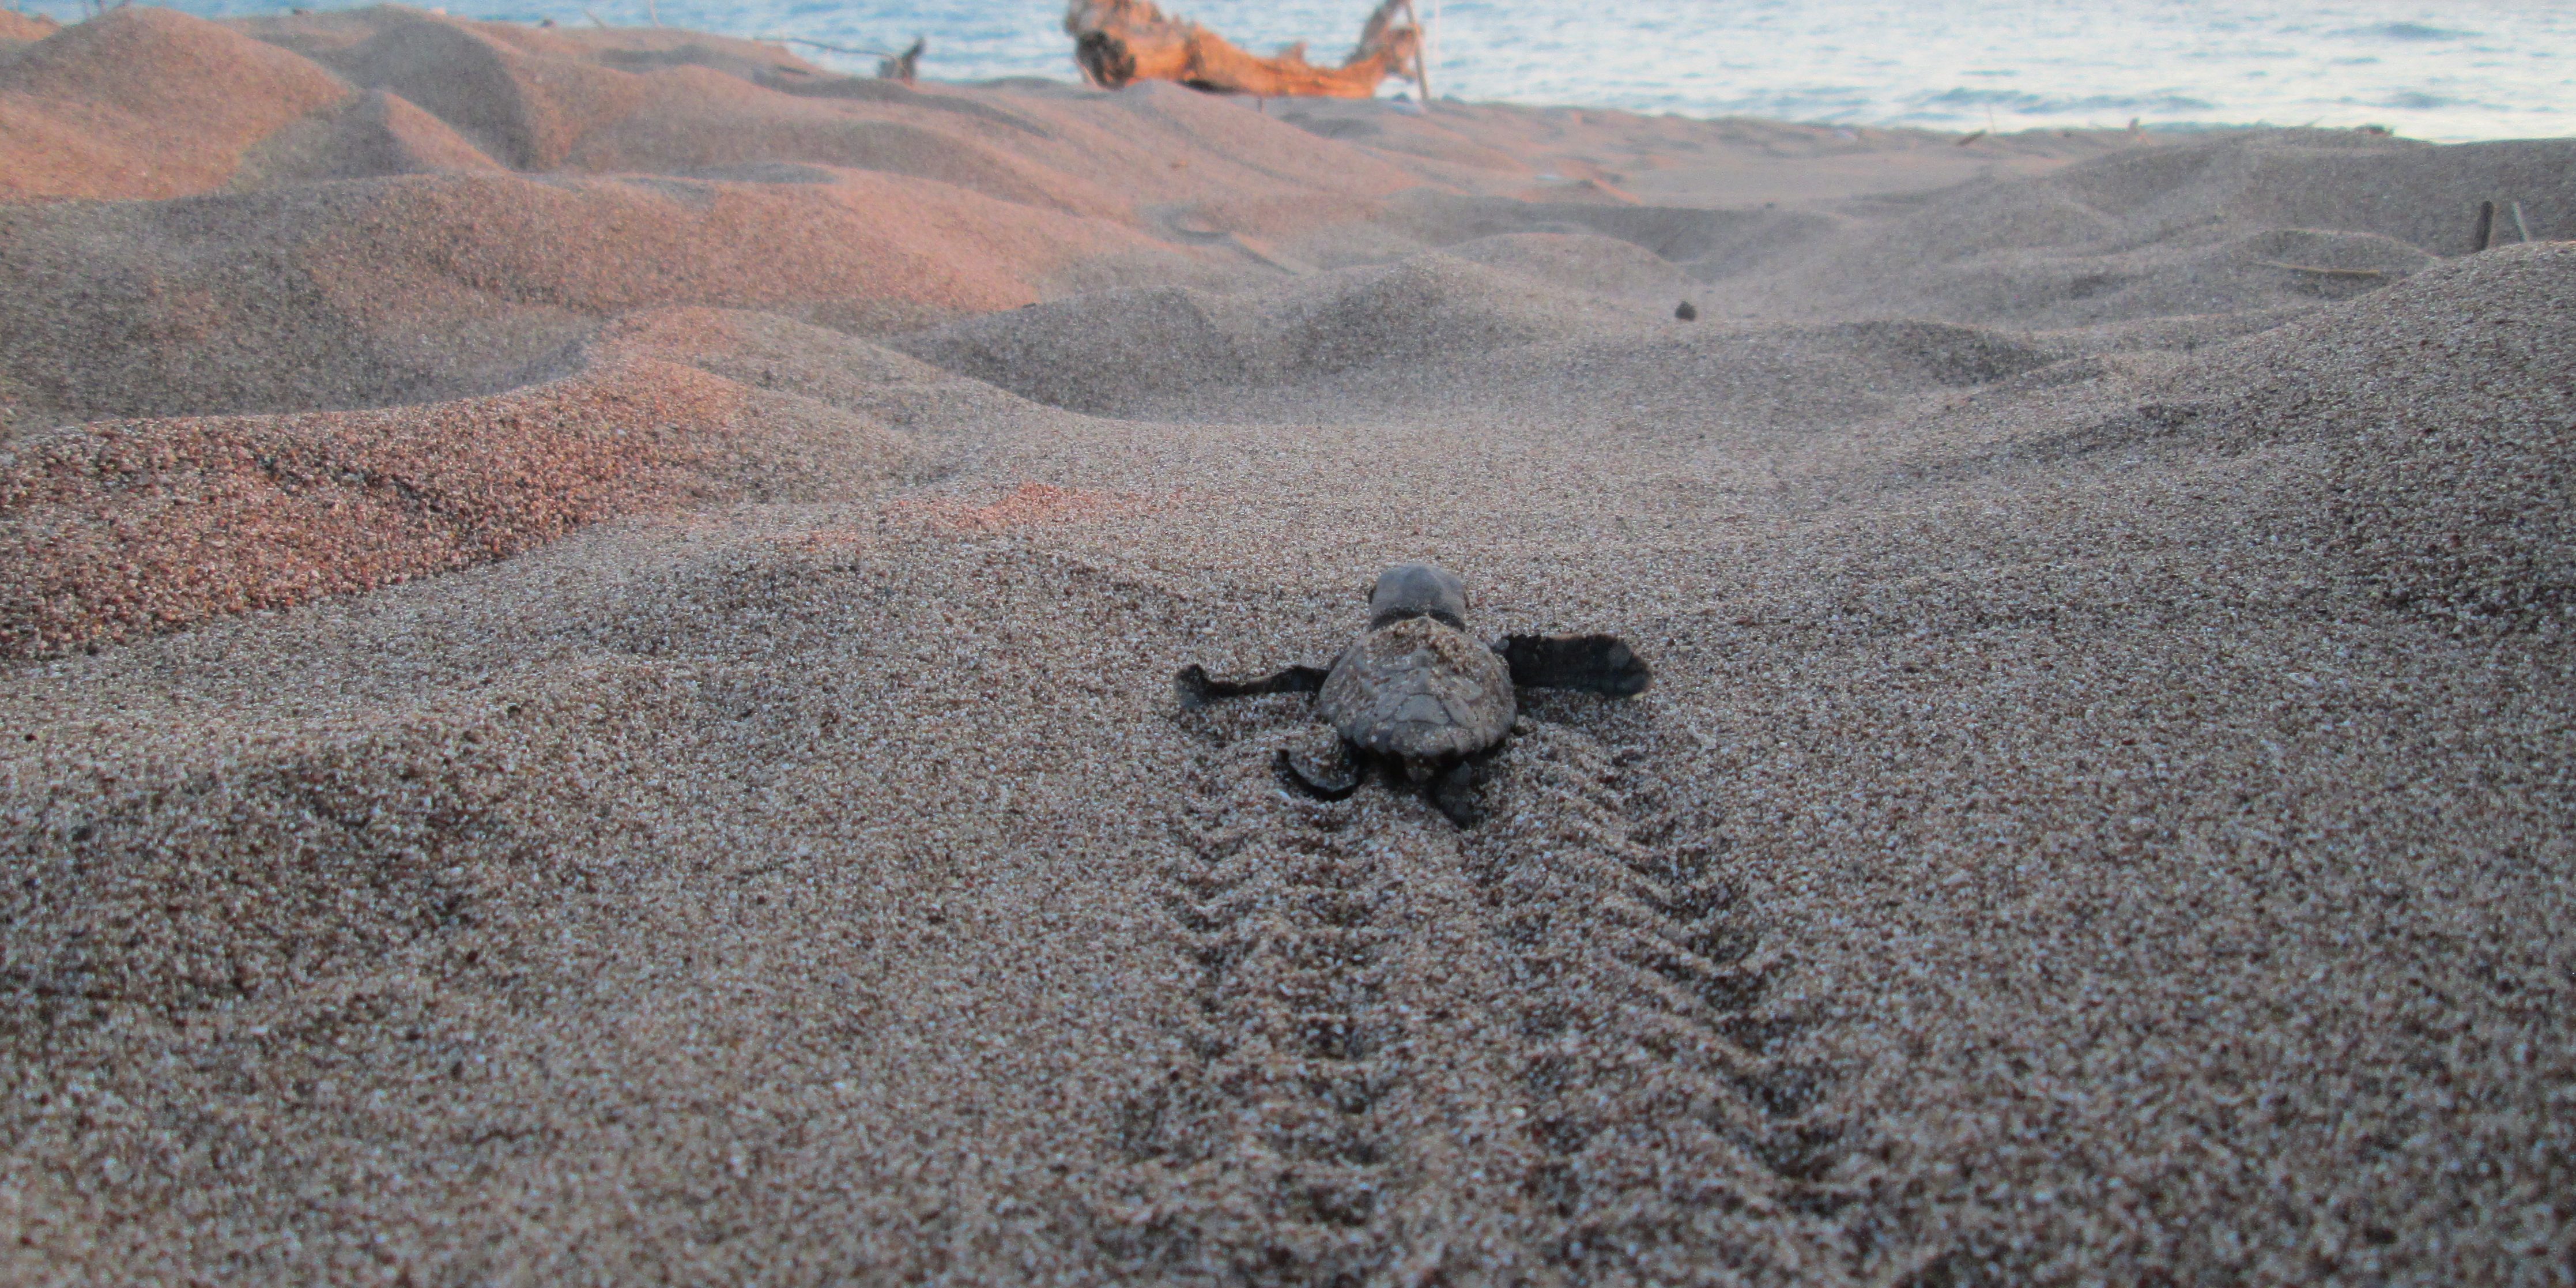 Turtle hatchlings make their way to the ocean.